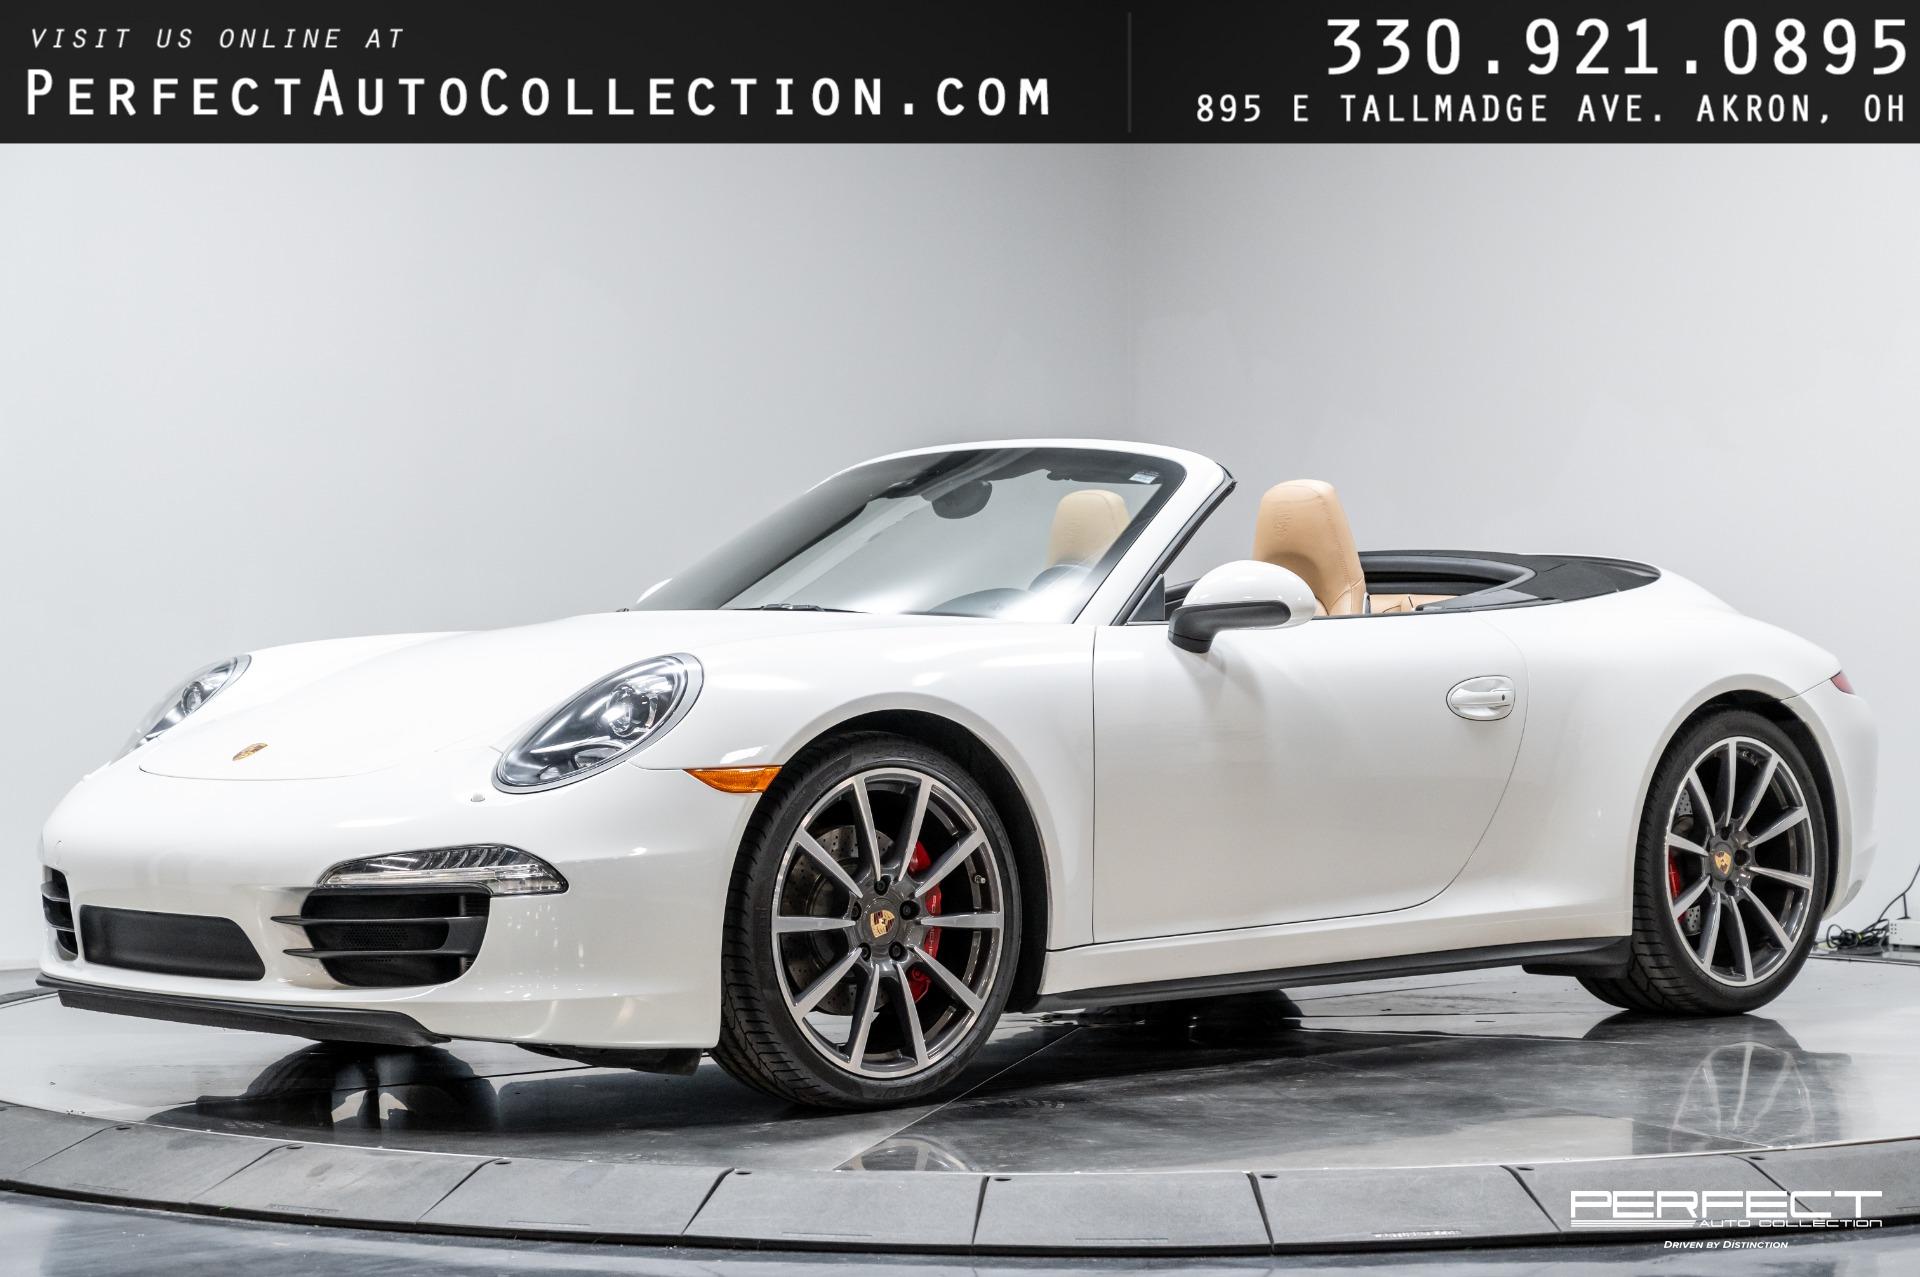 2013 PORSCHE 911 (991) CARRERA 4S - EXCLUSIVE EDITION for sale by auction  in Sussex, United Kingdom